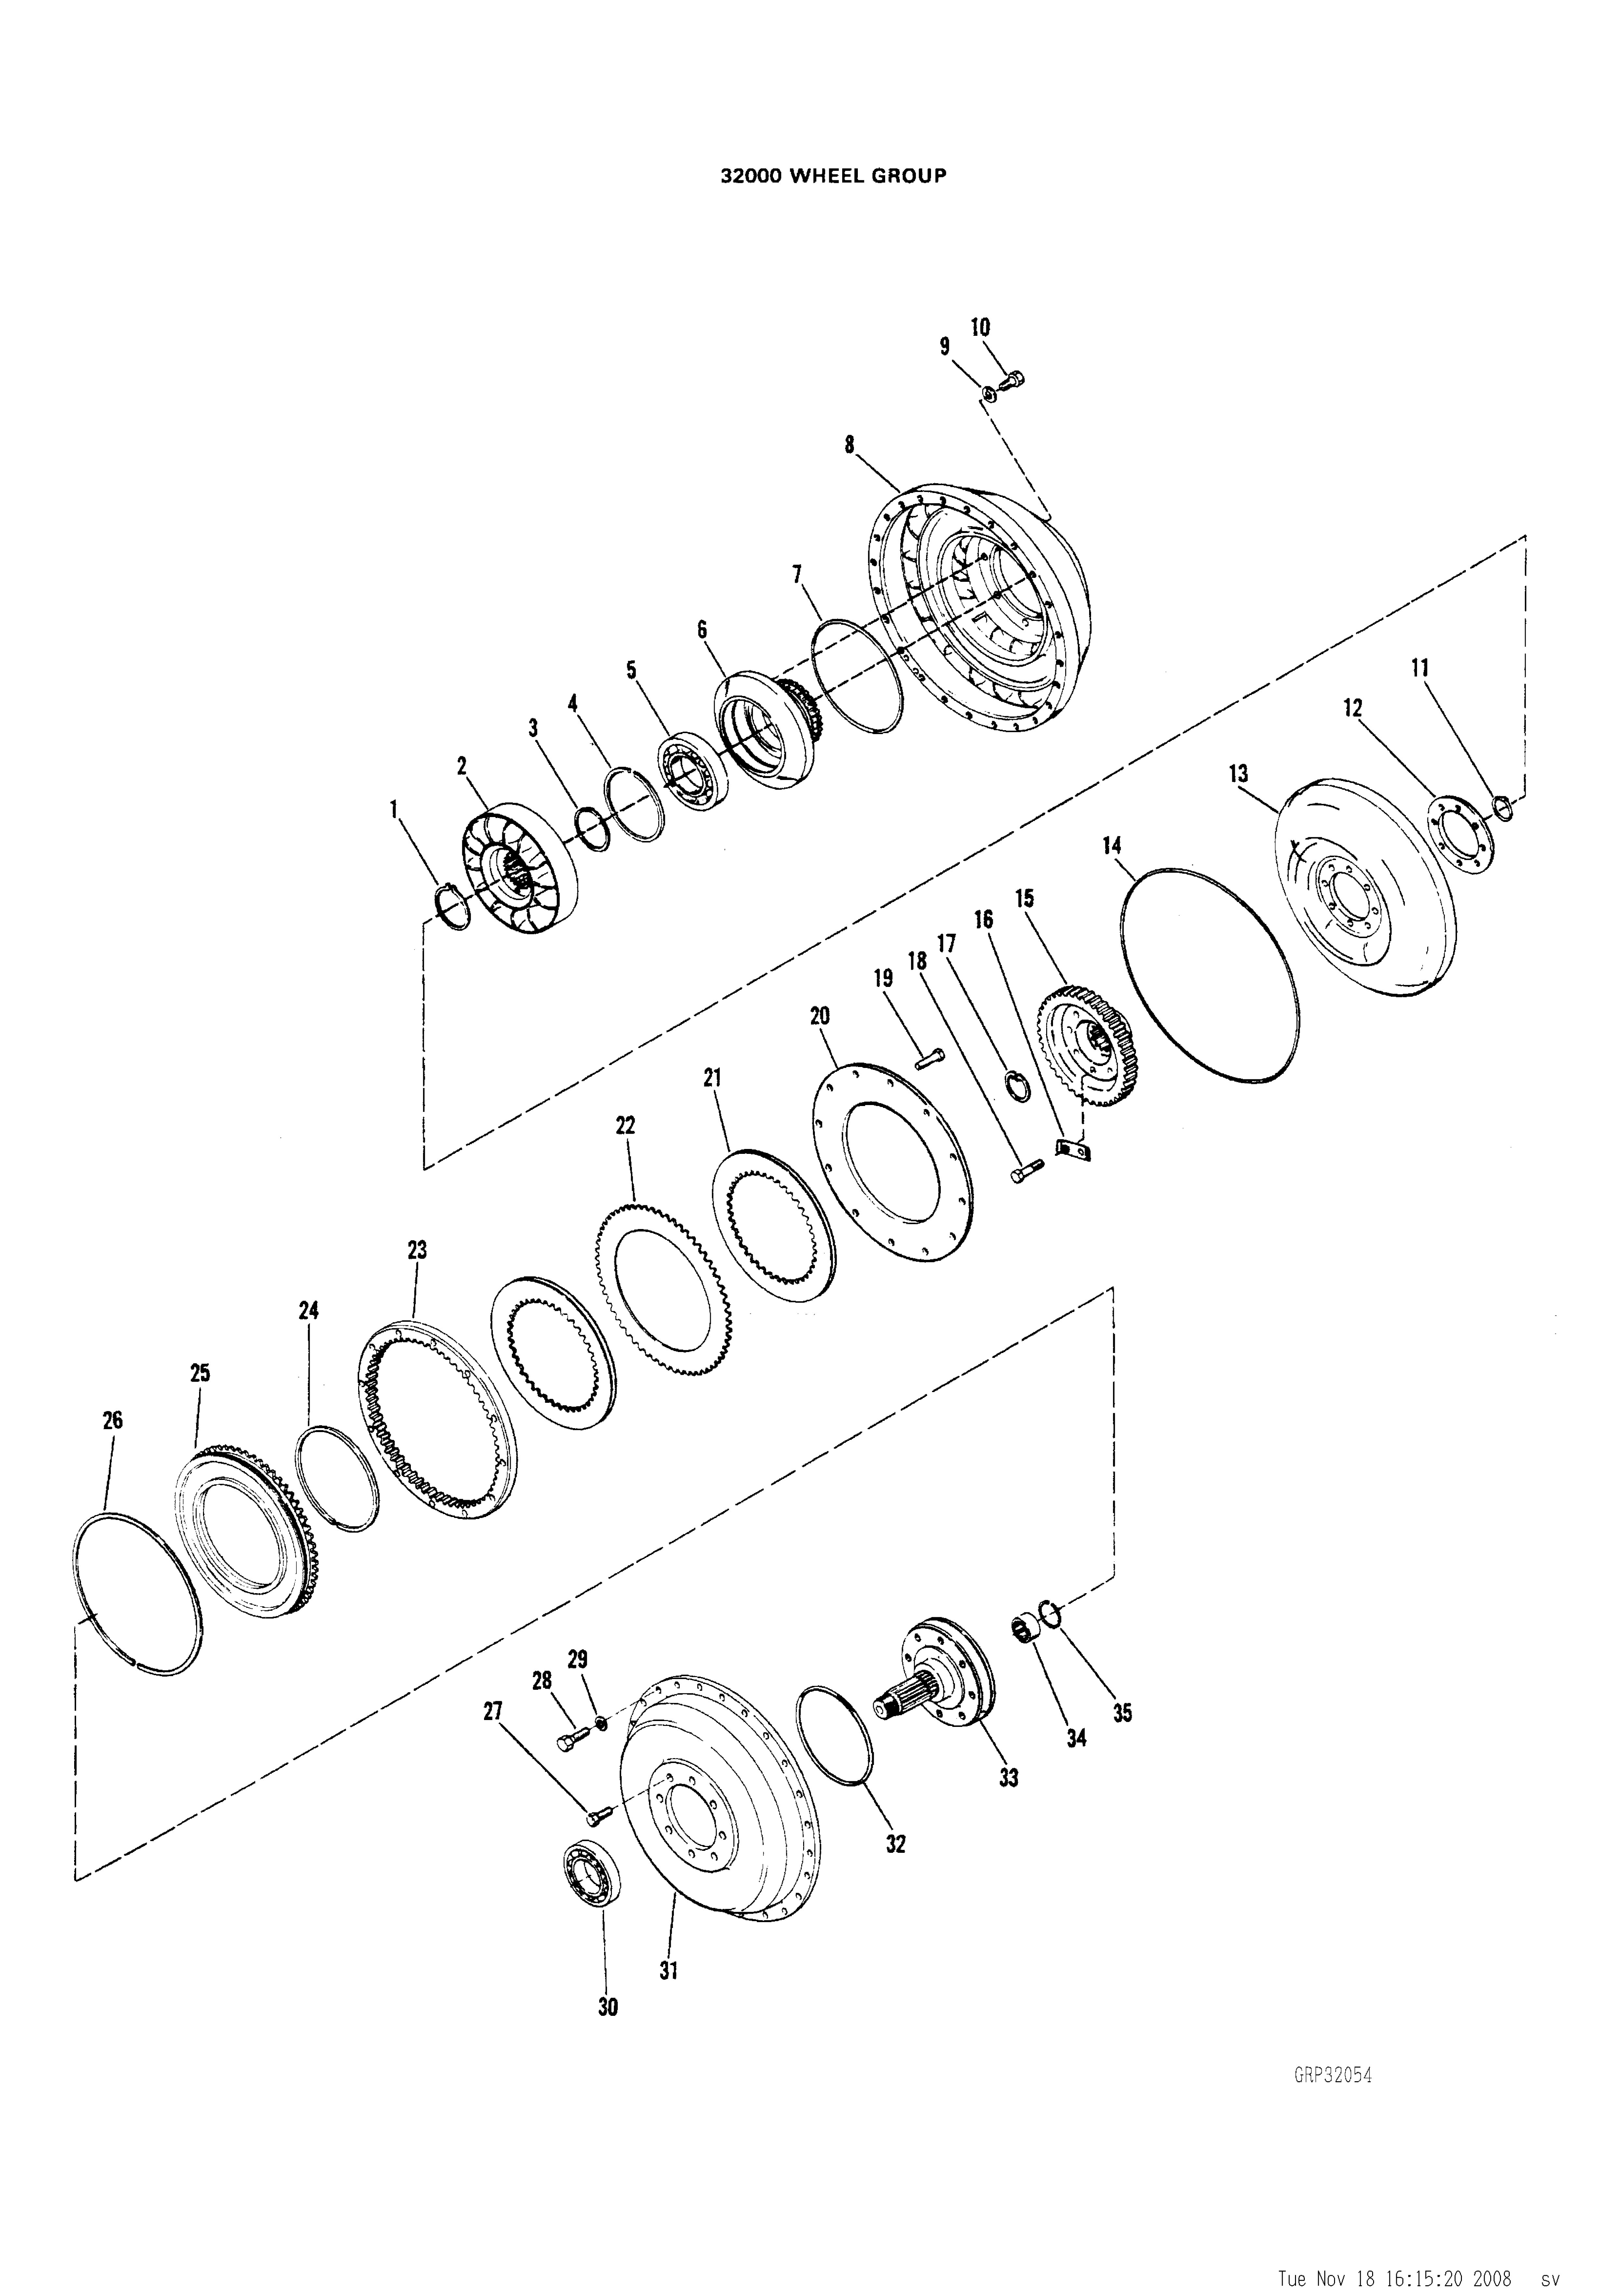 drawing for HARSCO 4001138-023 - BEARING (figure 2)